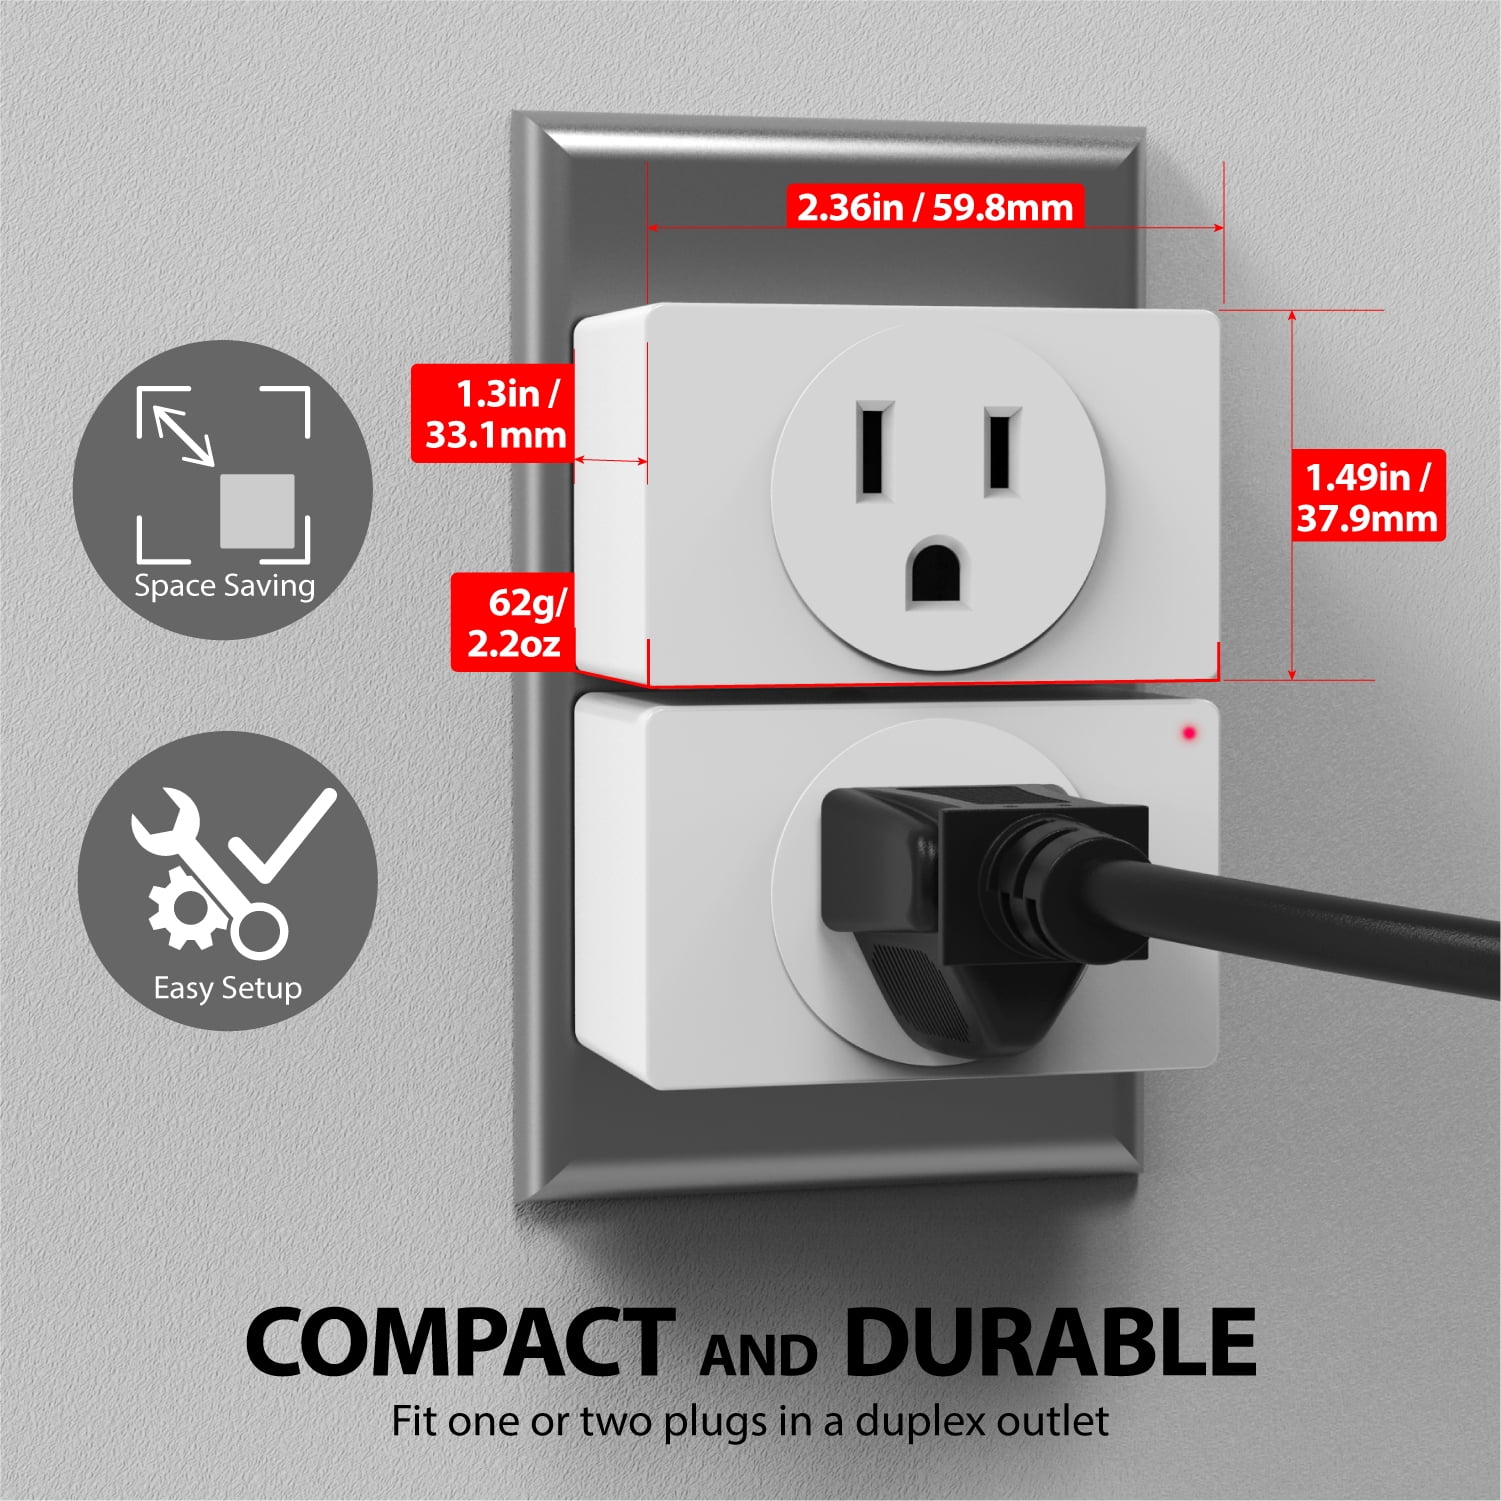 Fosmon Wireless Remote Control Electrical Outlet Switch (5 Pack +